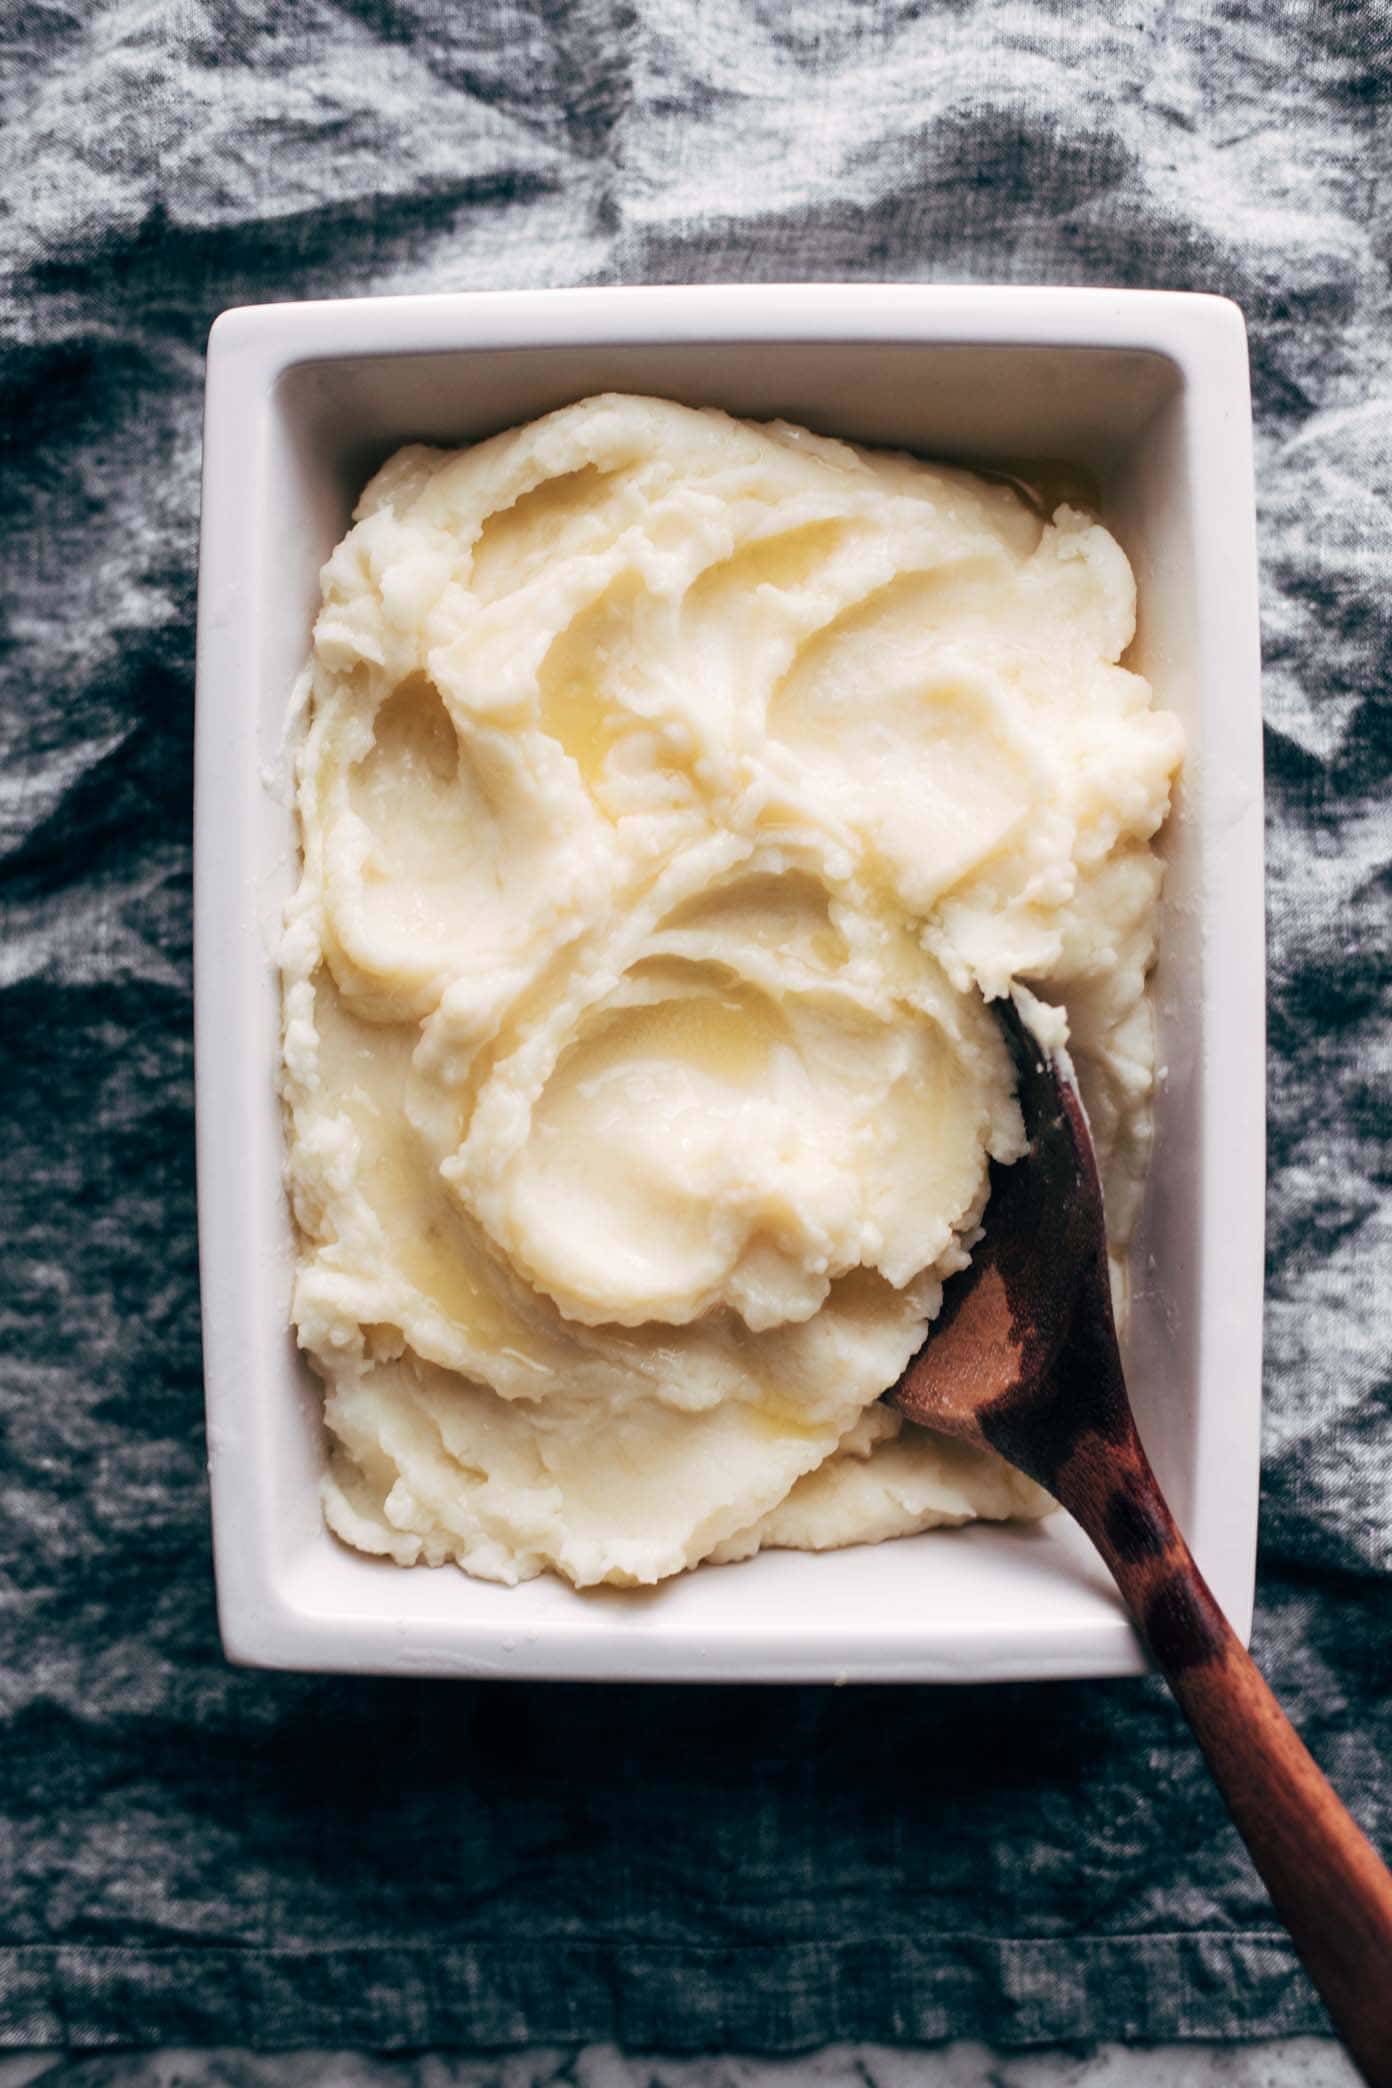 Mashed Potatoes made in the Instant Pot! they are so creamy, so fluffy, and SO GOOD. from start to finish in 30 minutes, all in one pot!